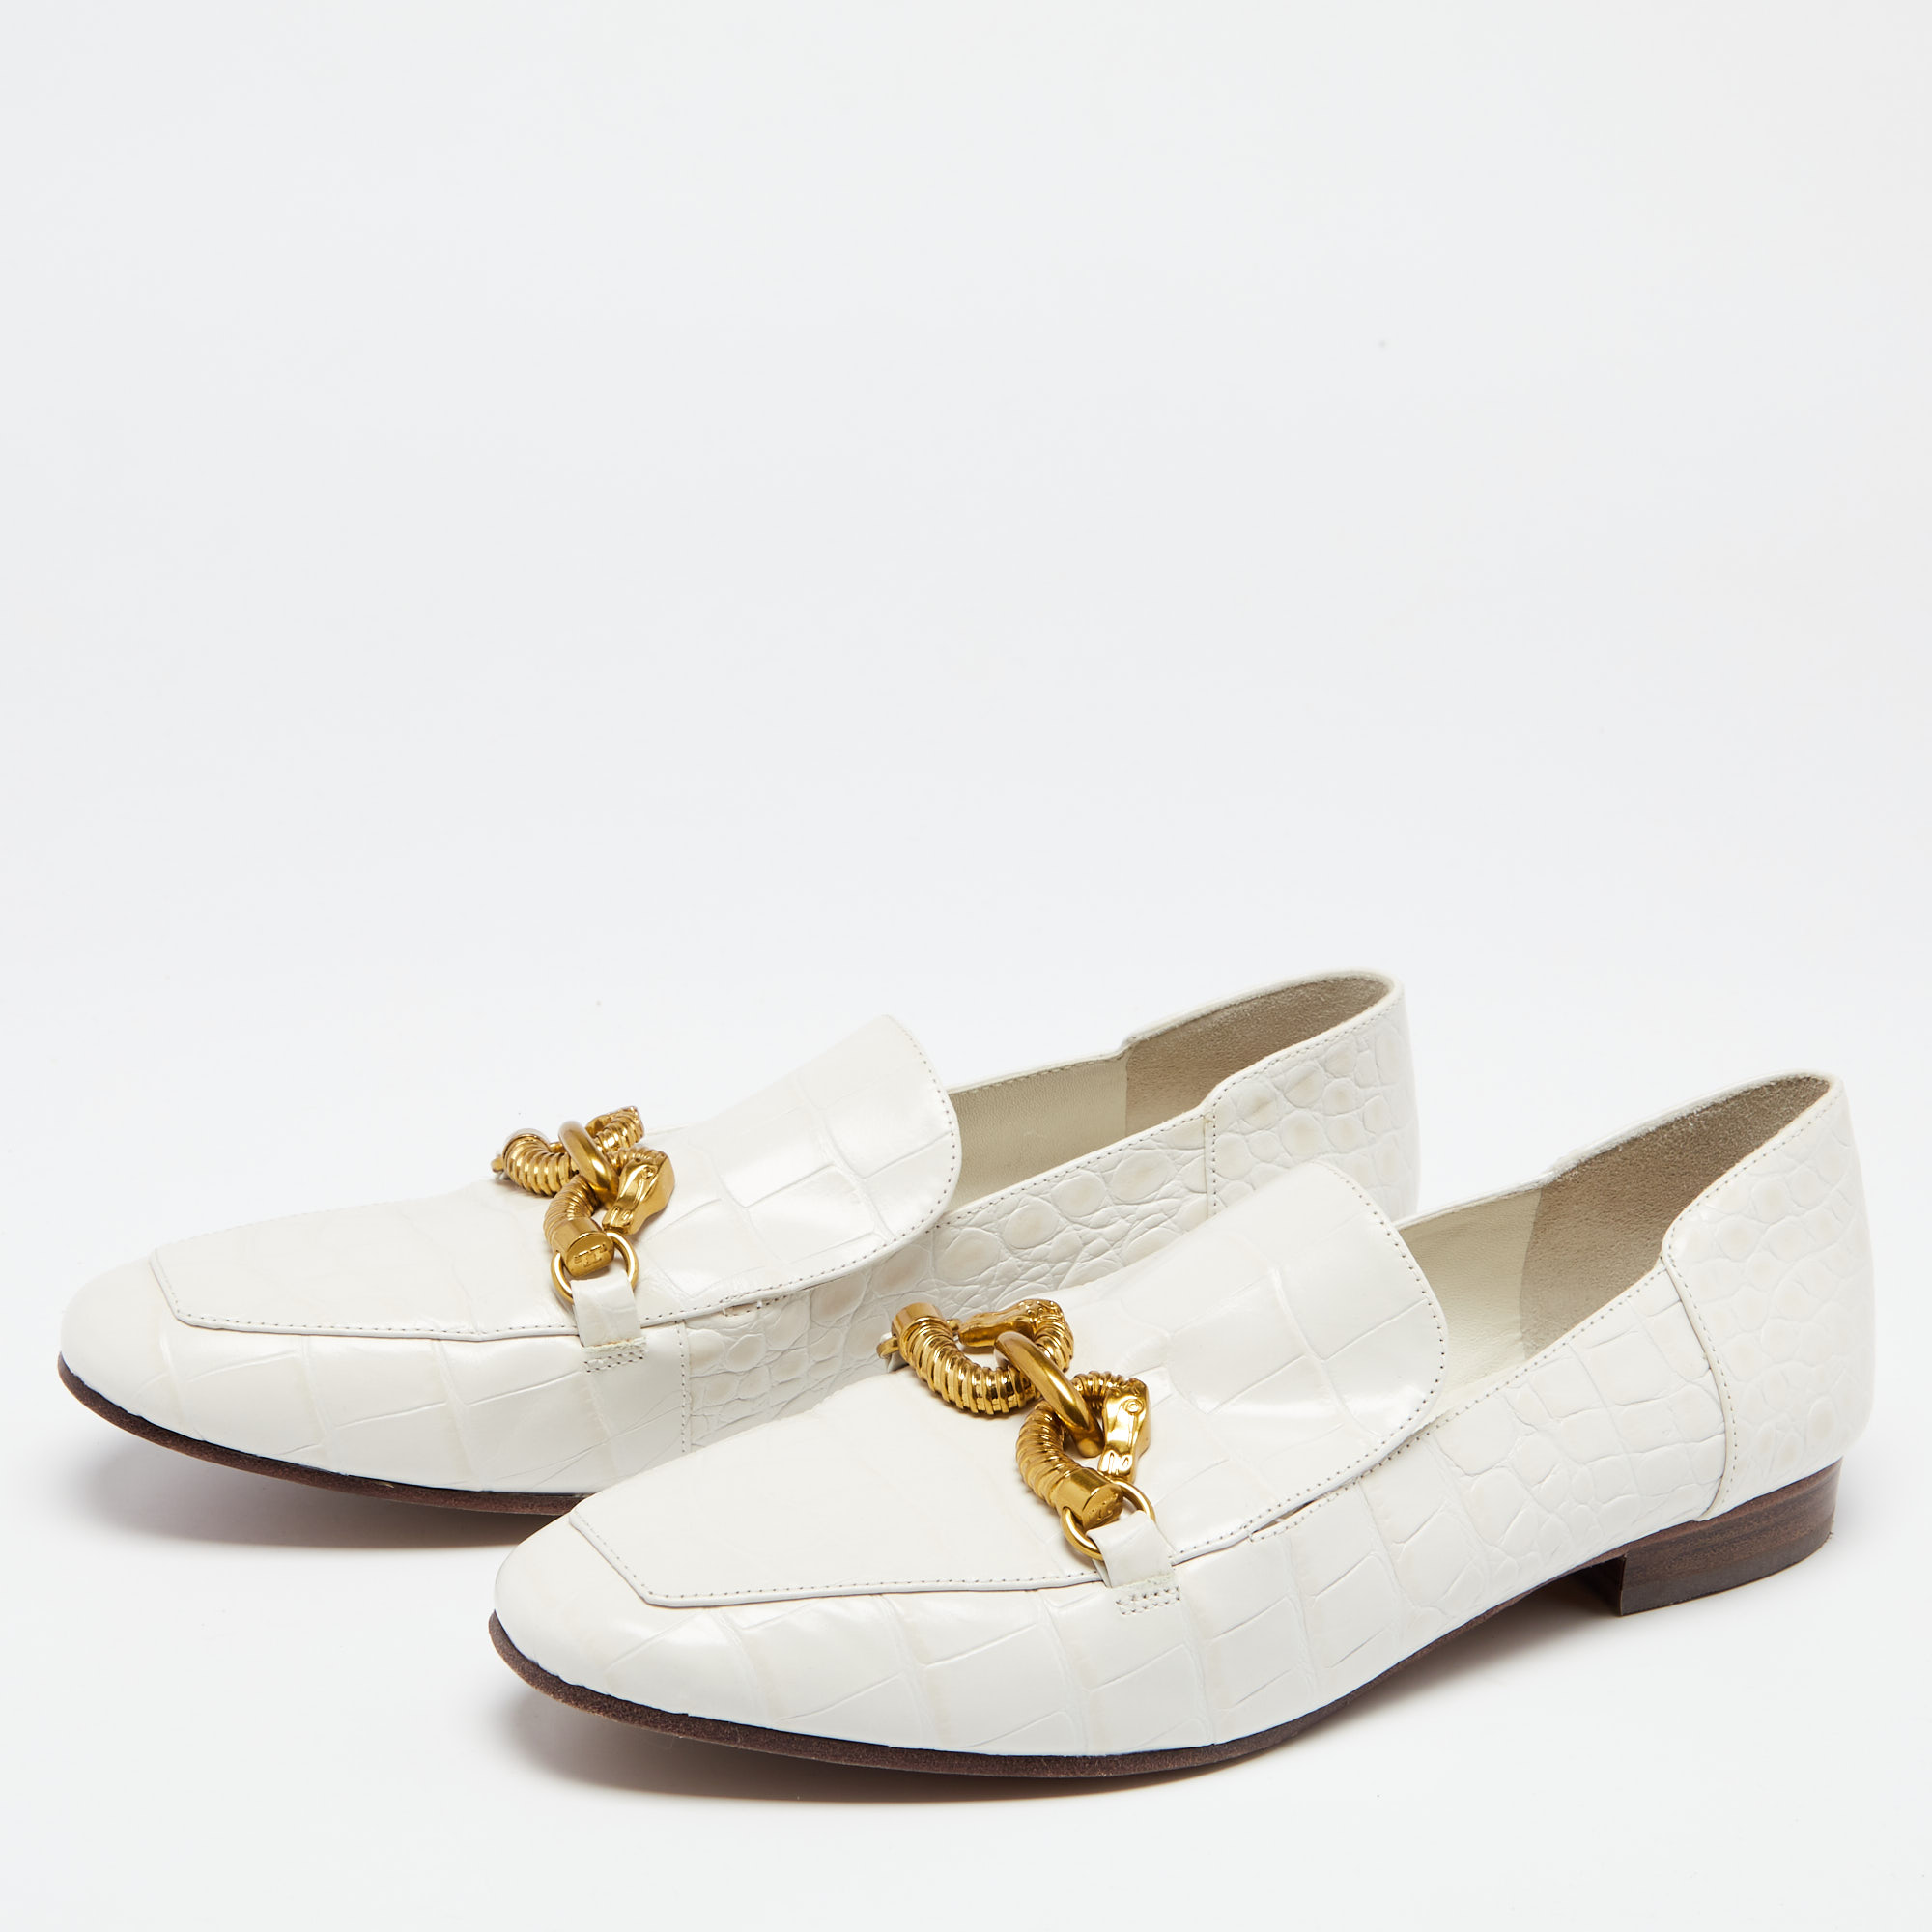 

Tory Burch White Croc Embossed Leather Jessa Loafers Size